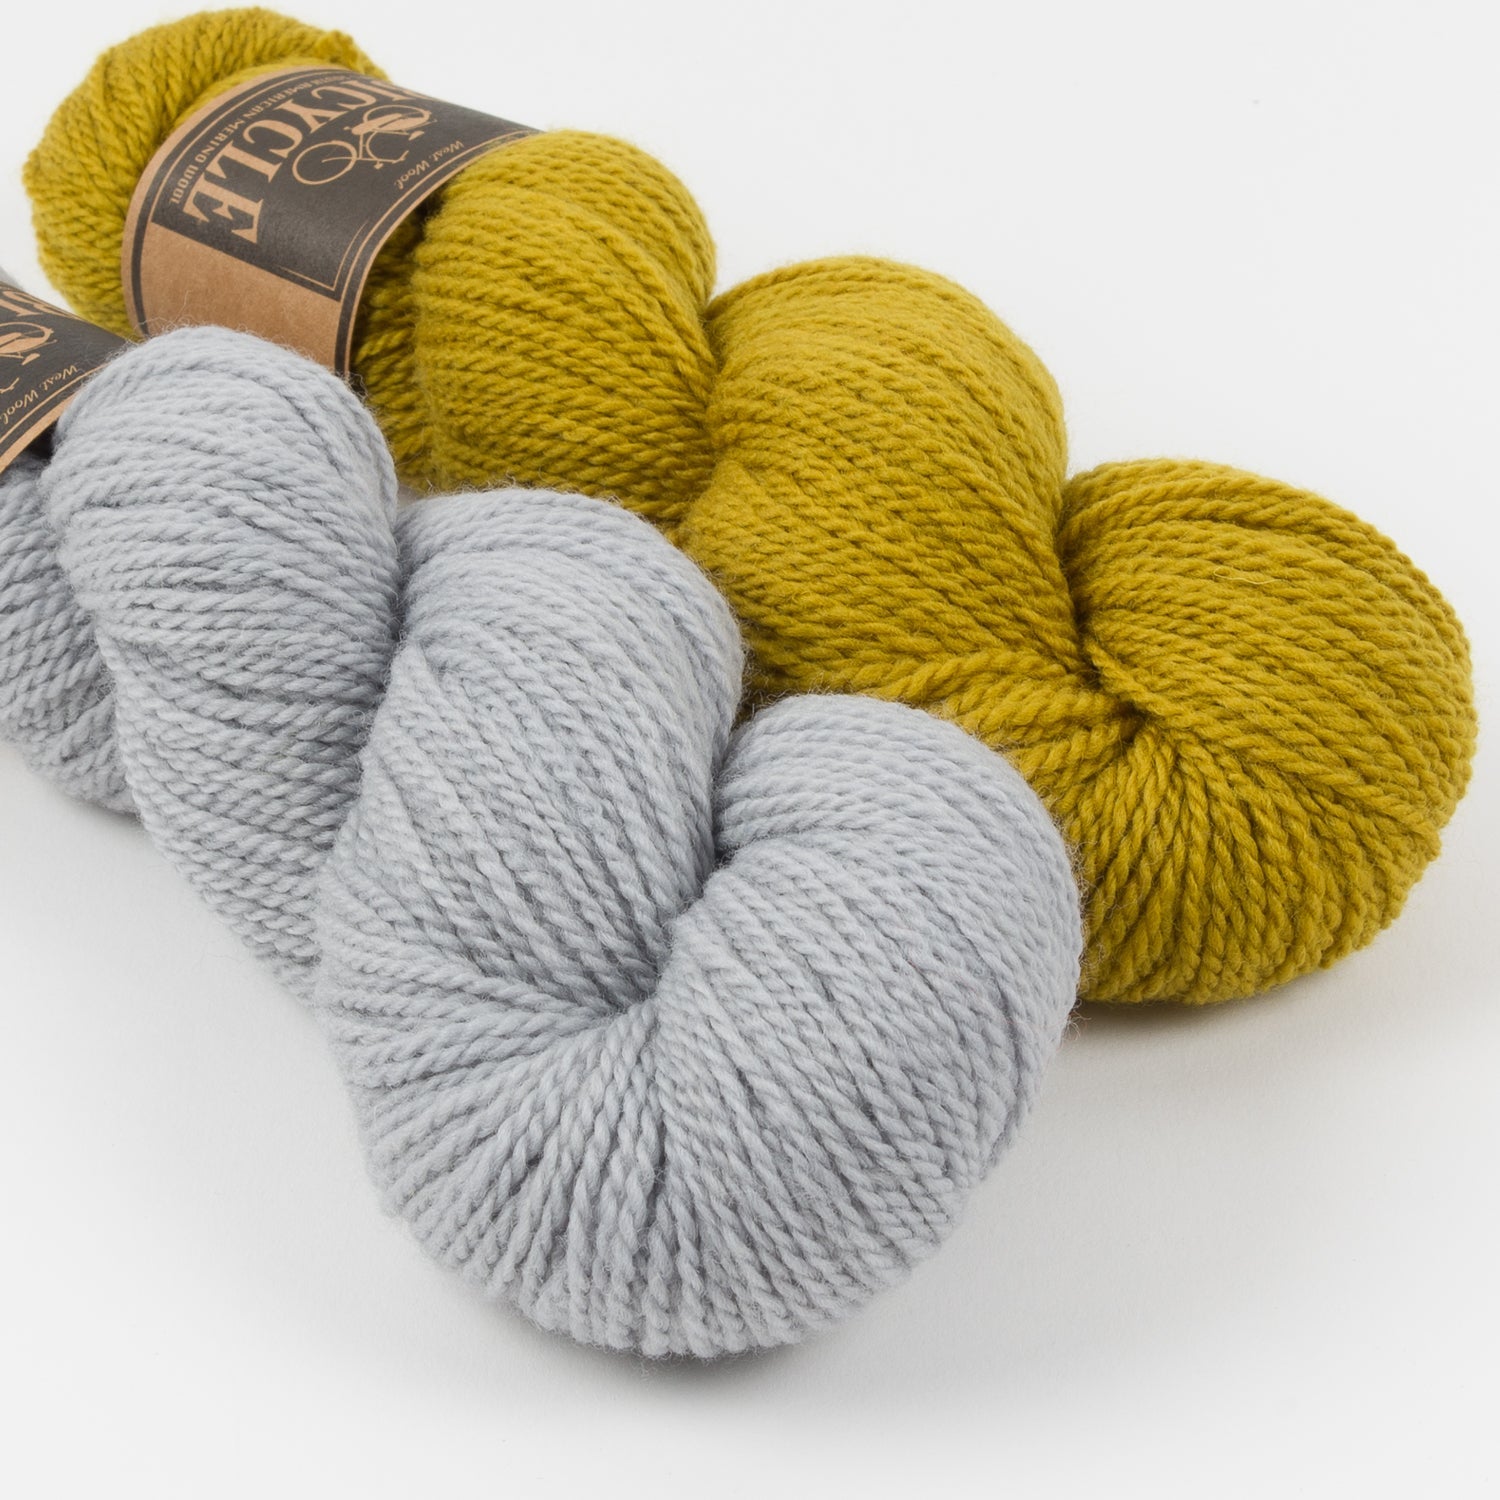 WESTKNITS KIT - DELECTABLE SKY